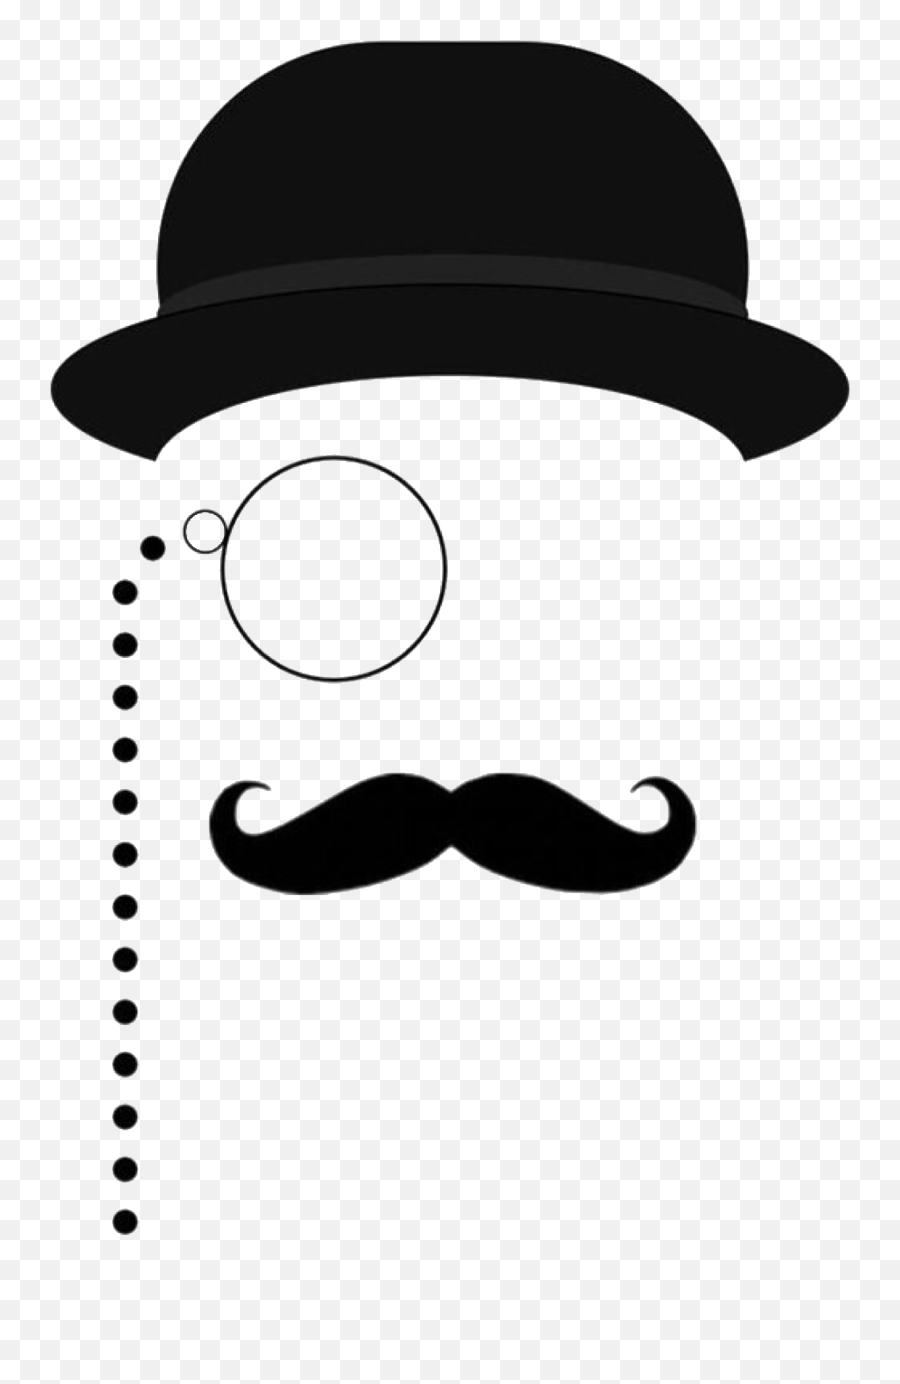 Popular And Trending Monocle Stickers On Picsart - Man Silhouette Bowler Hat Emoji,Emoji With Monocle